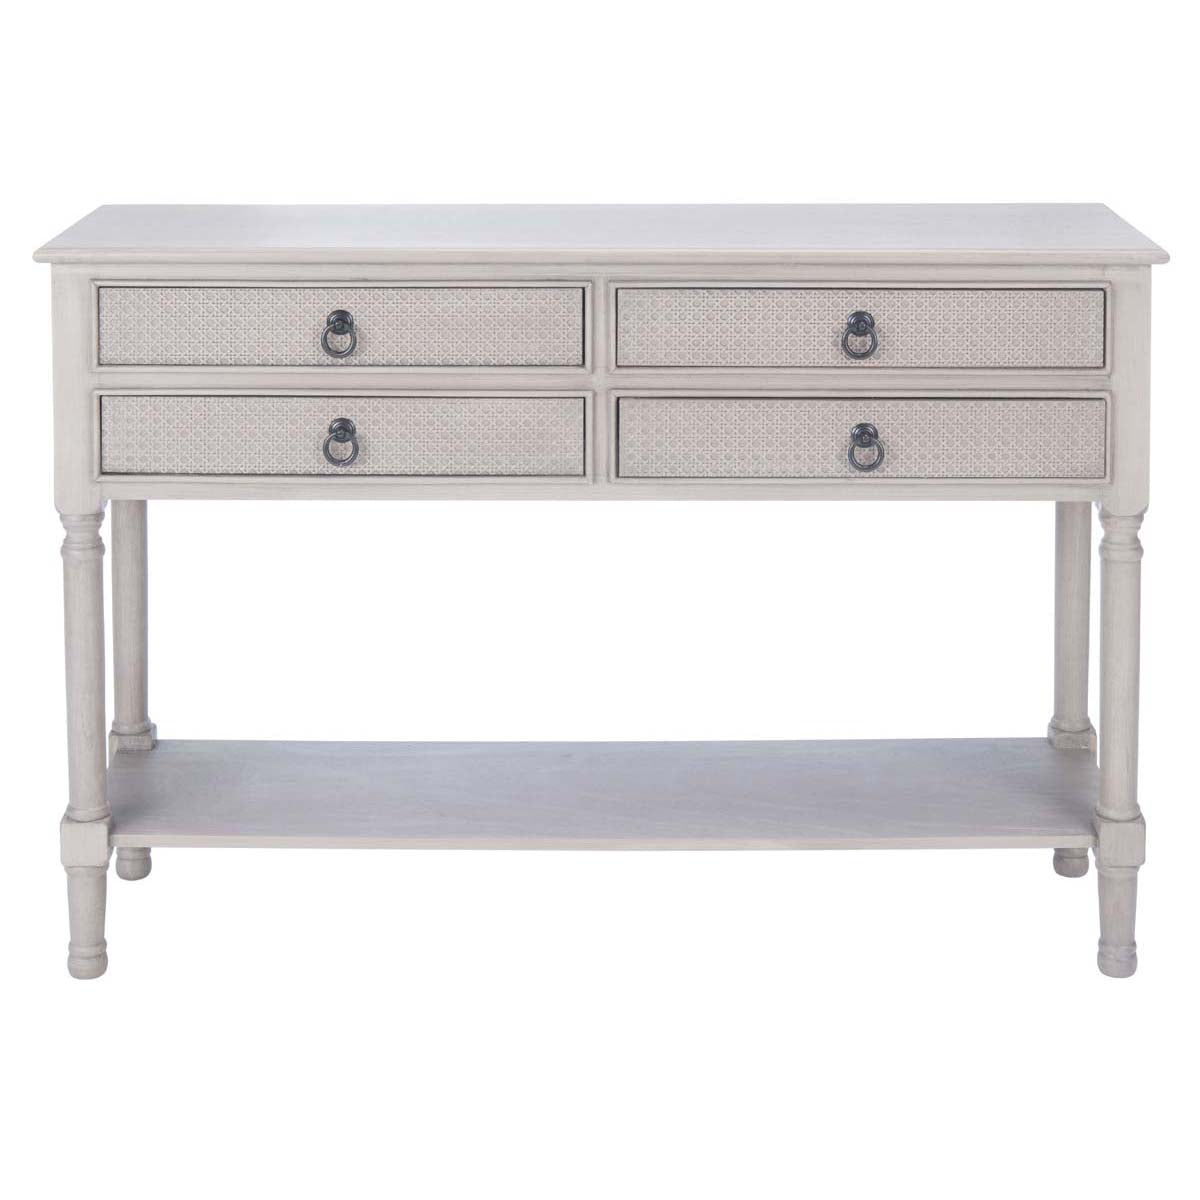 Safavieh Haines 4Drw Console Table, CNS5728 - Greige